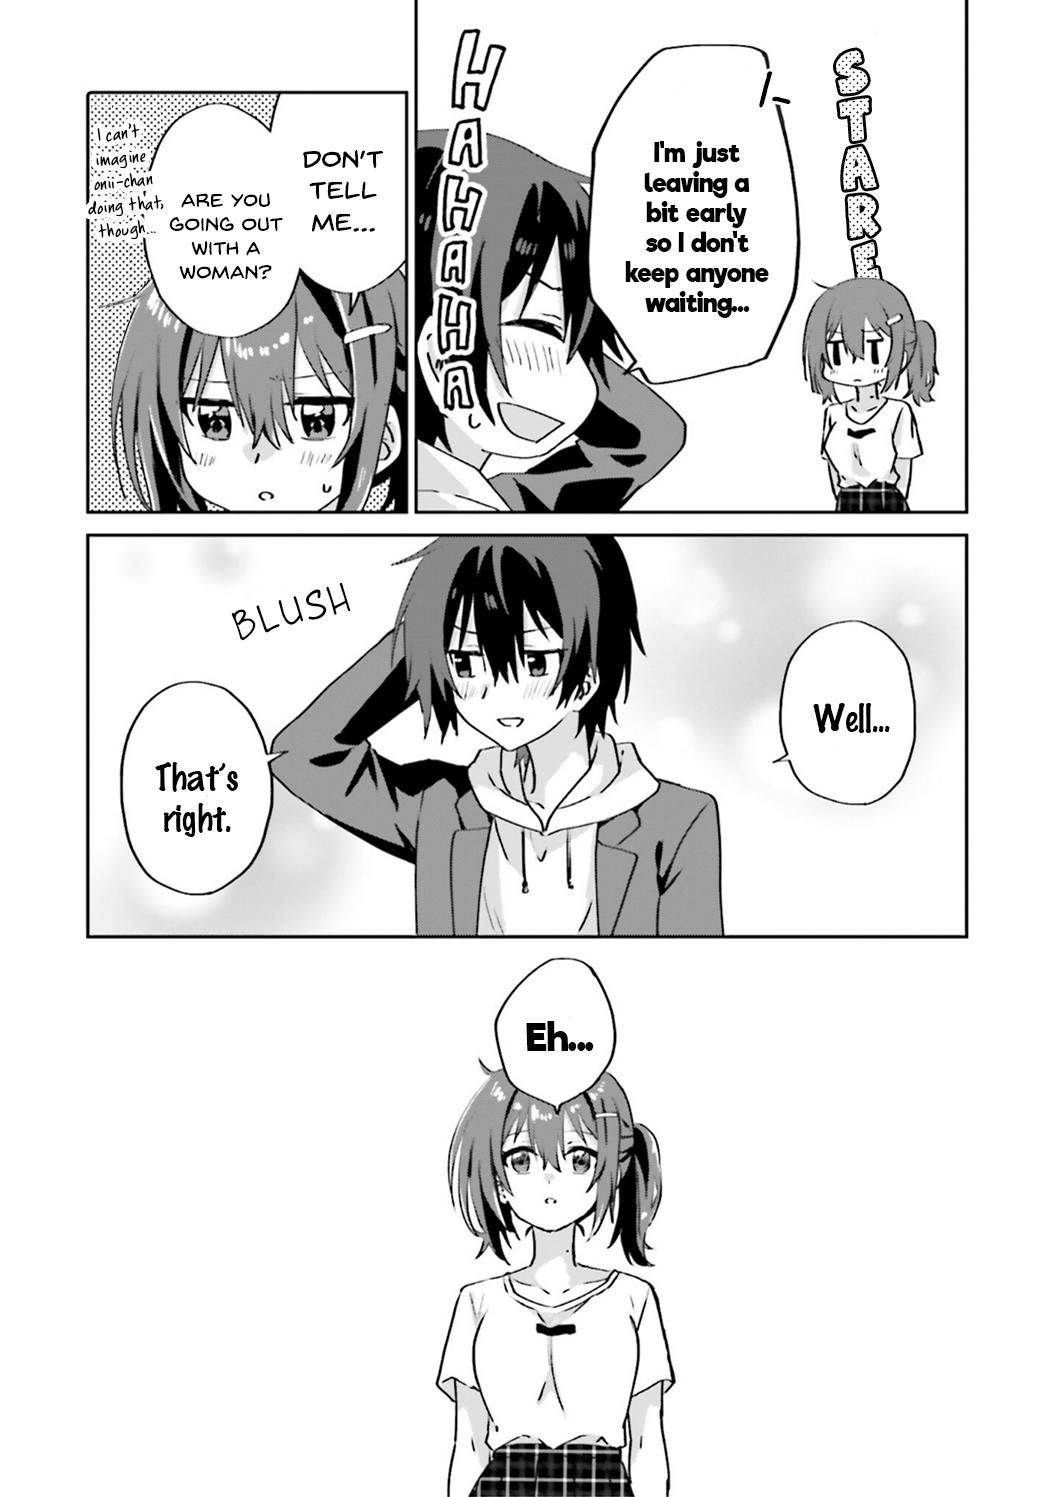 Since I’Ve Entered The World Of Romantic Comedy Manga, I’Ll Do My Best To Make The Losing Heroine Happy Vol.1 Chapter 6.5: Vol.1 Extras - Picture 3